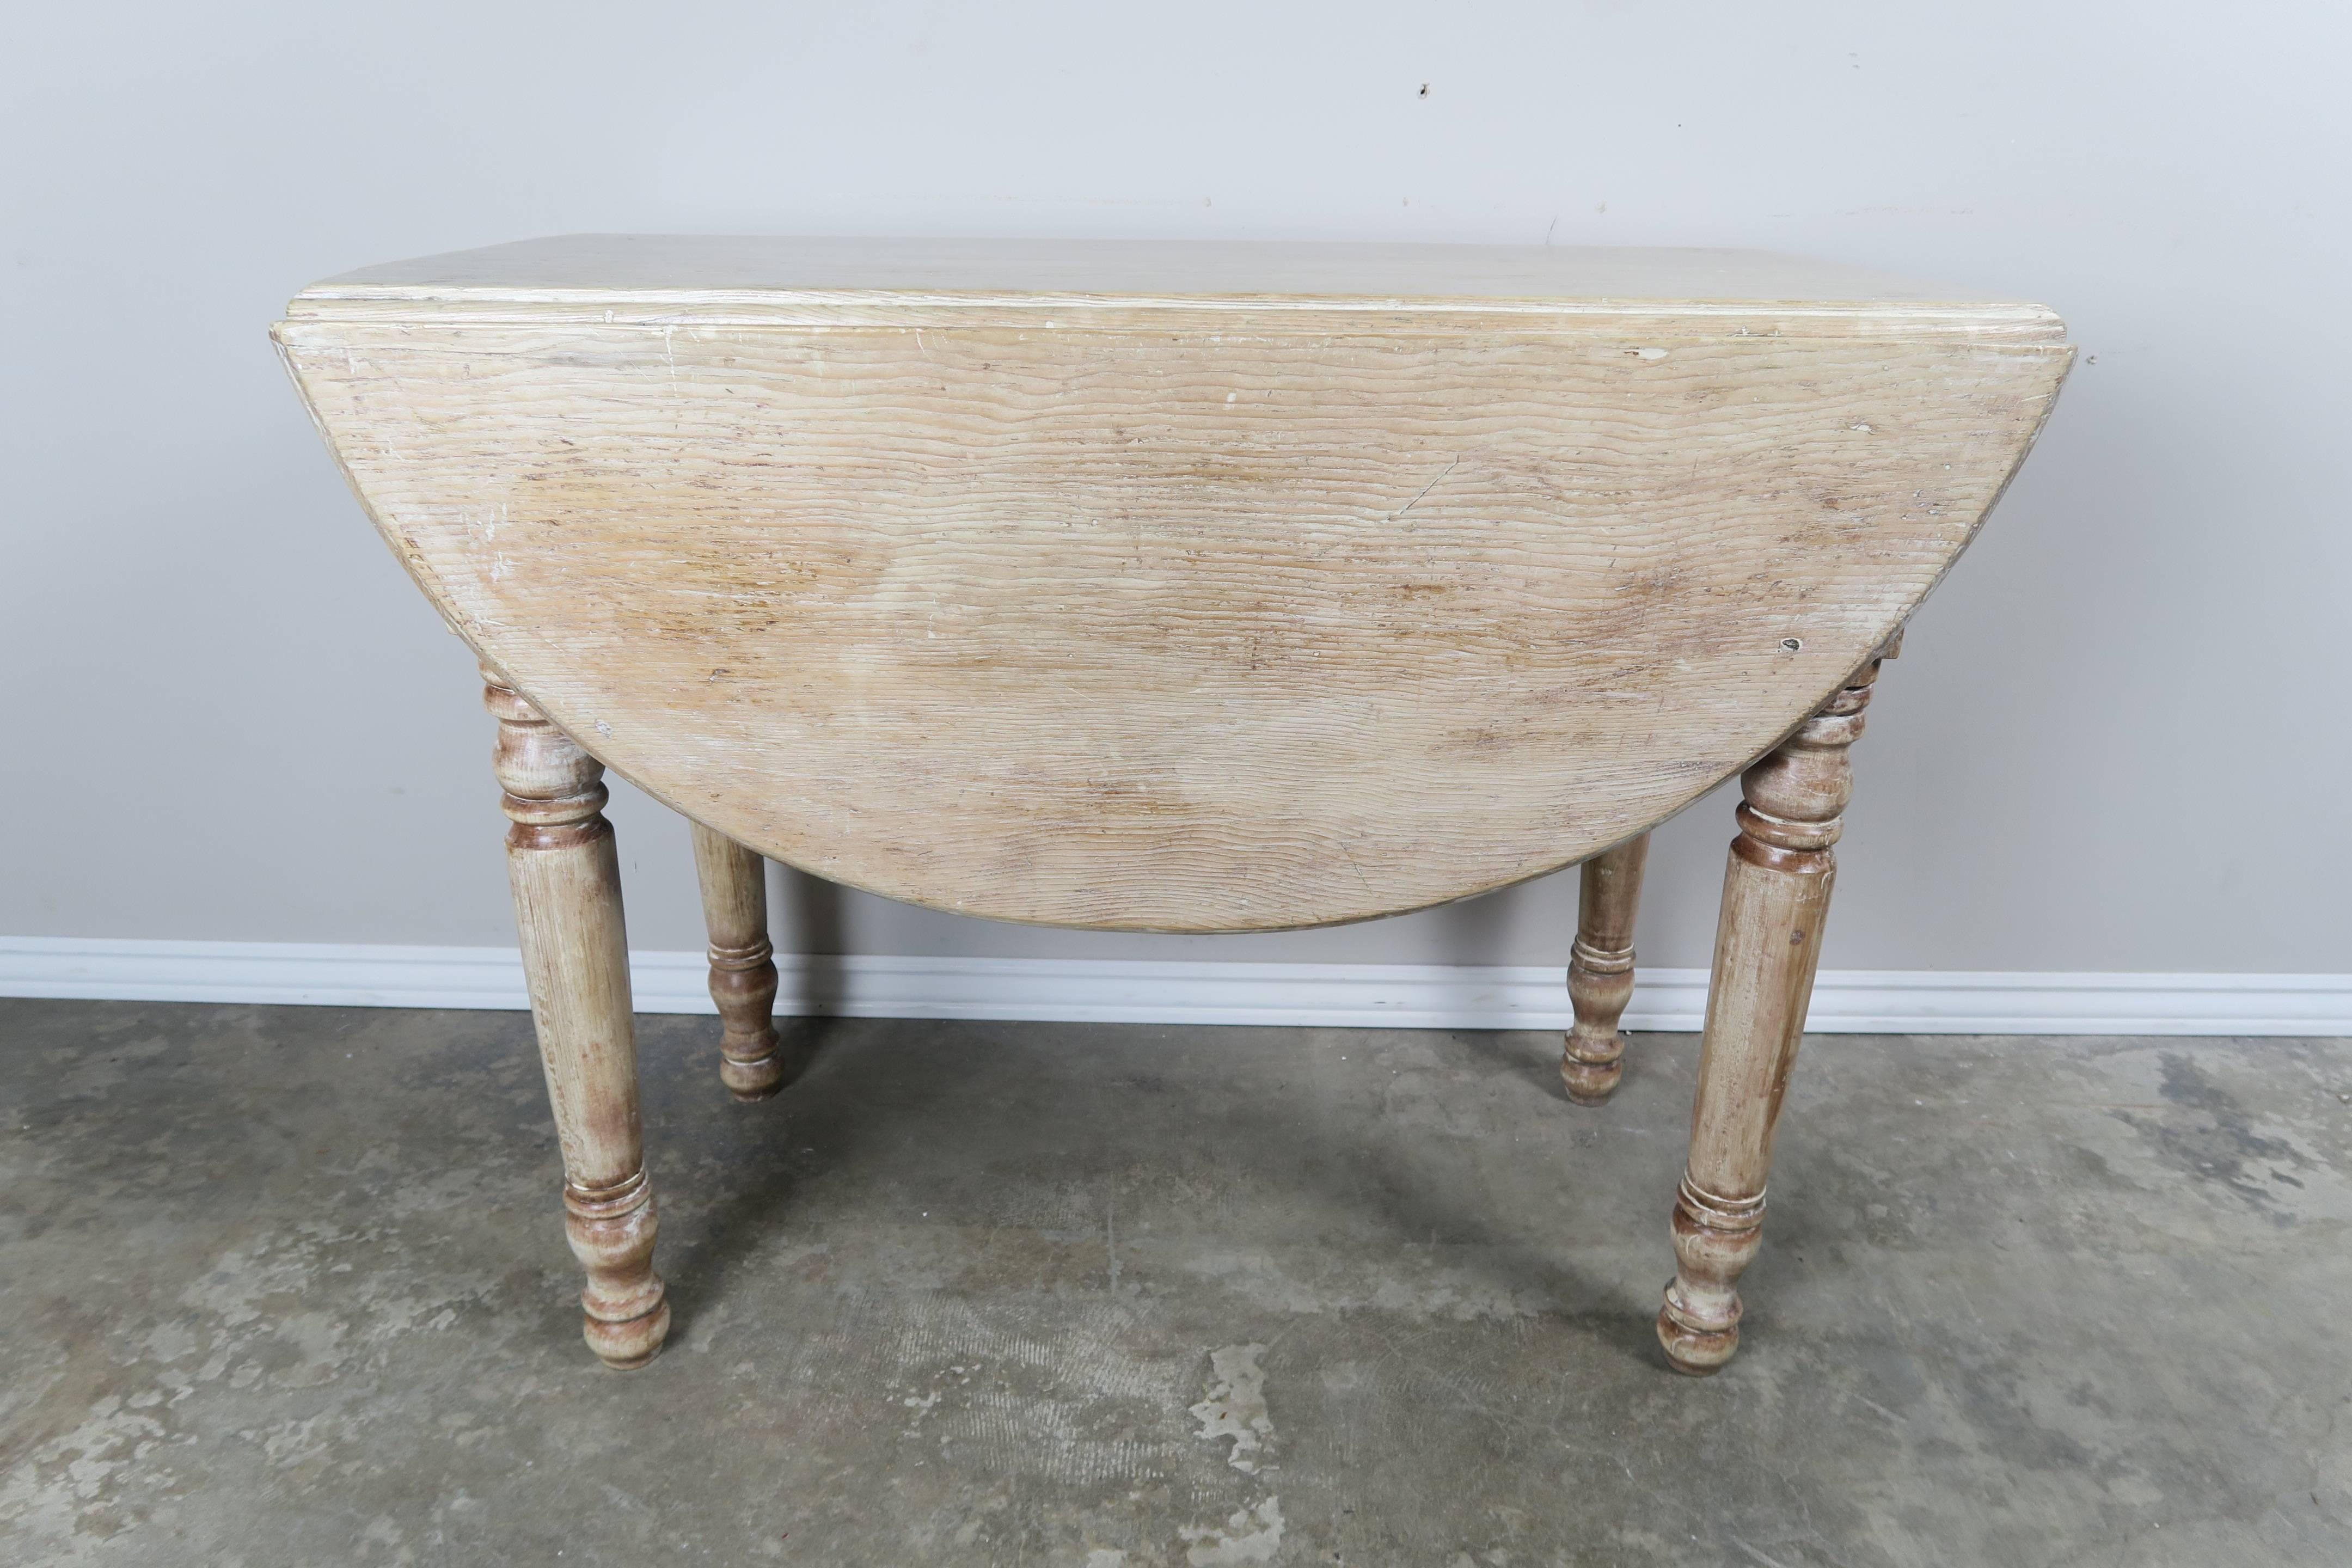 English drop-leaf table with natural pine washed finish. Perfect for a small apartment or studio.